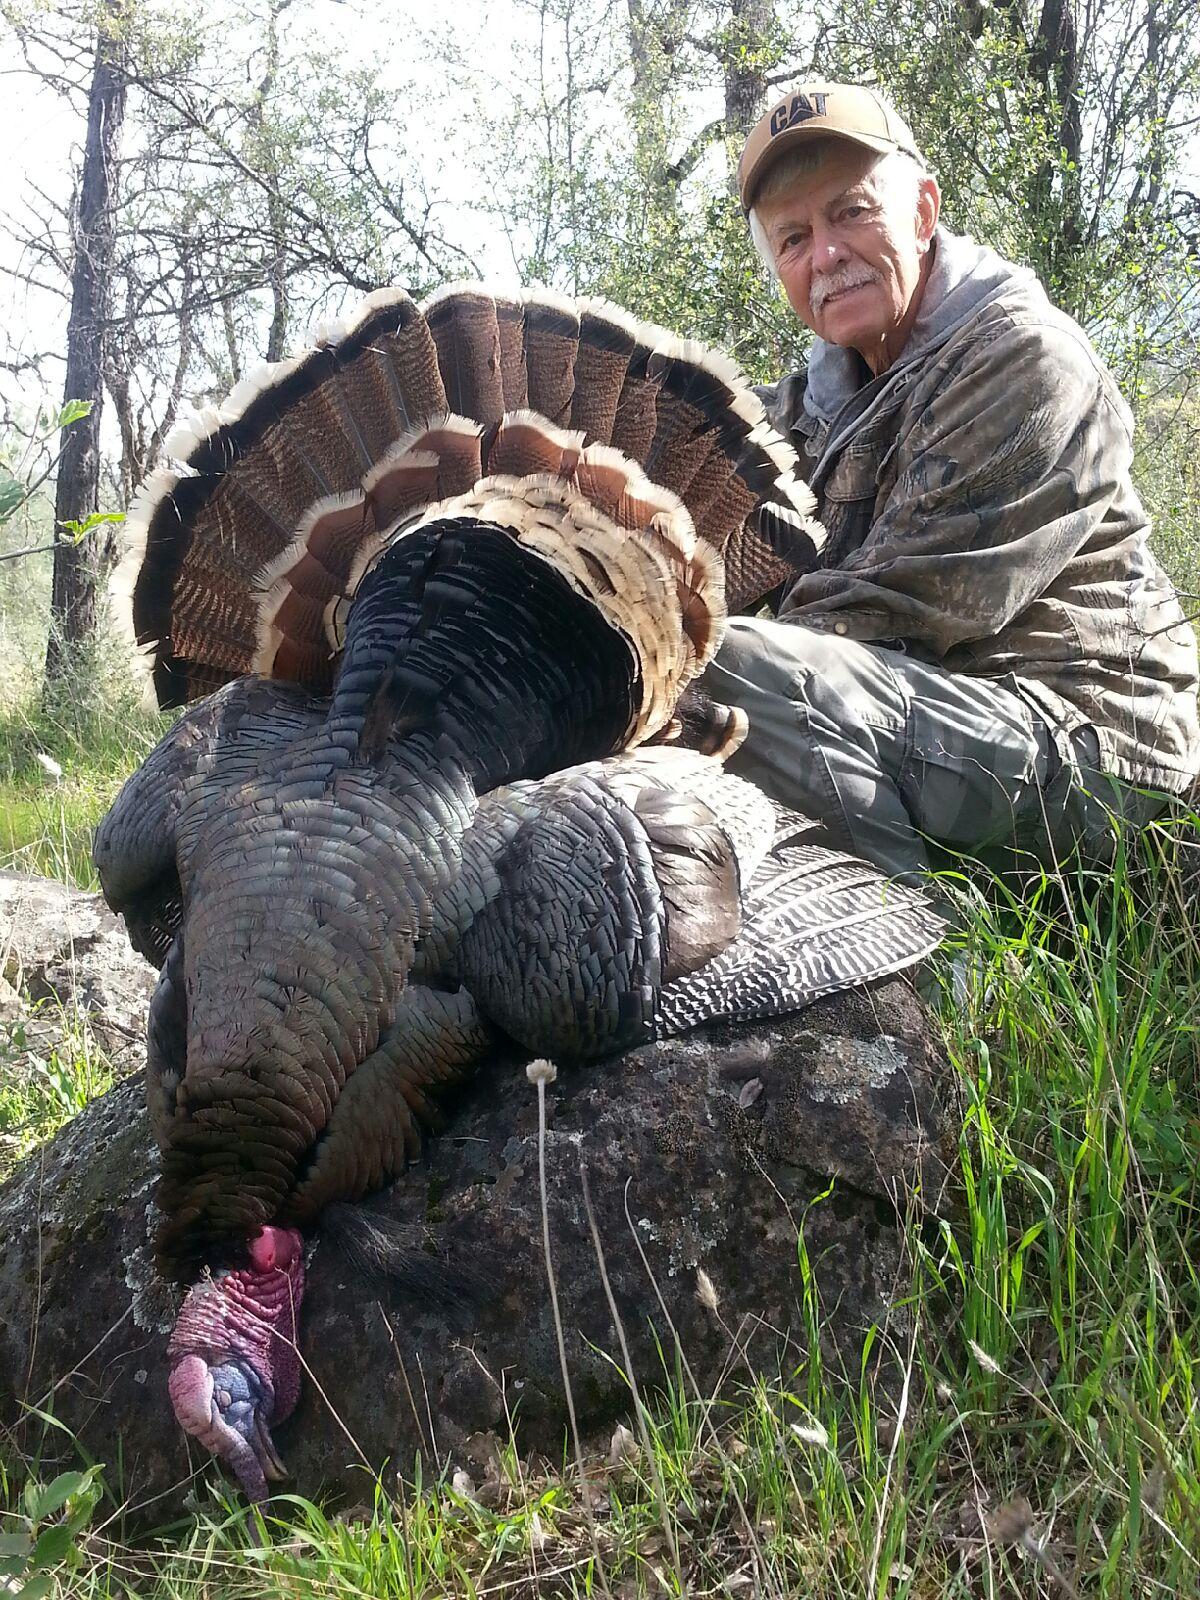 Rob  with another one of many turkeys in his hunting career